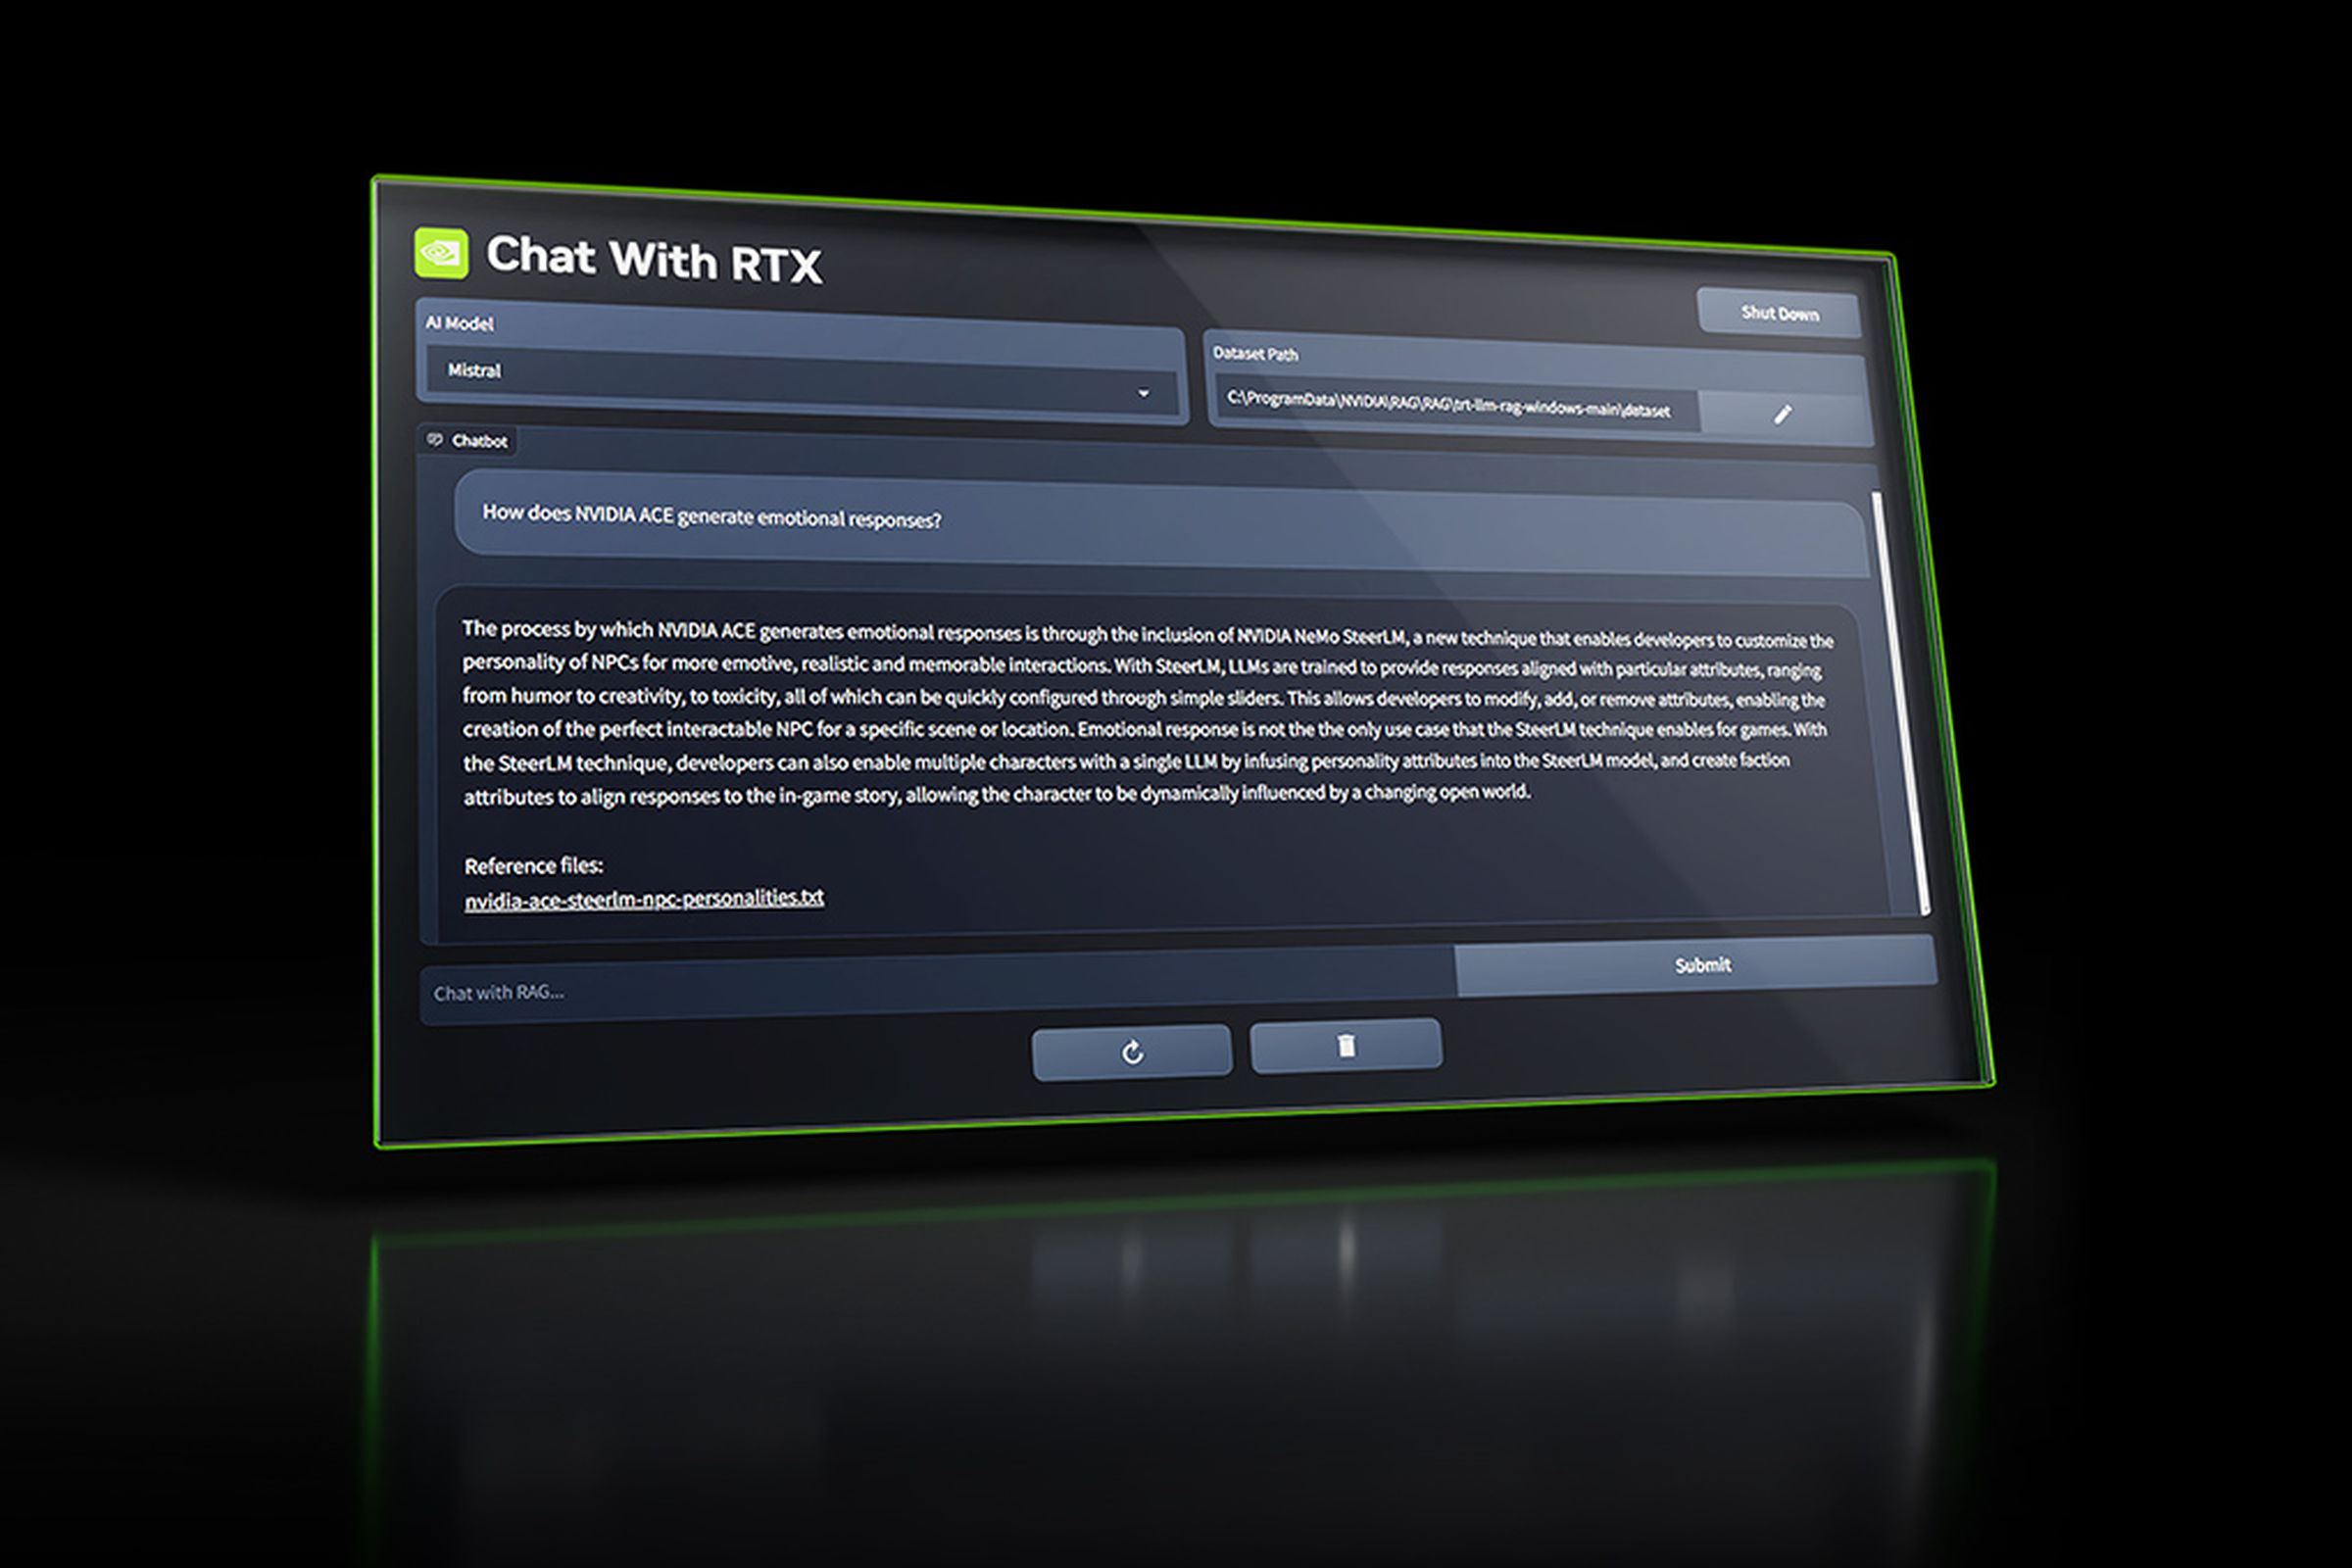 Illustration of Nvidia’s Chat with RTX app